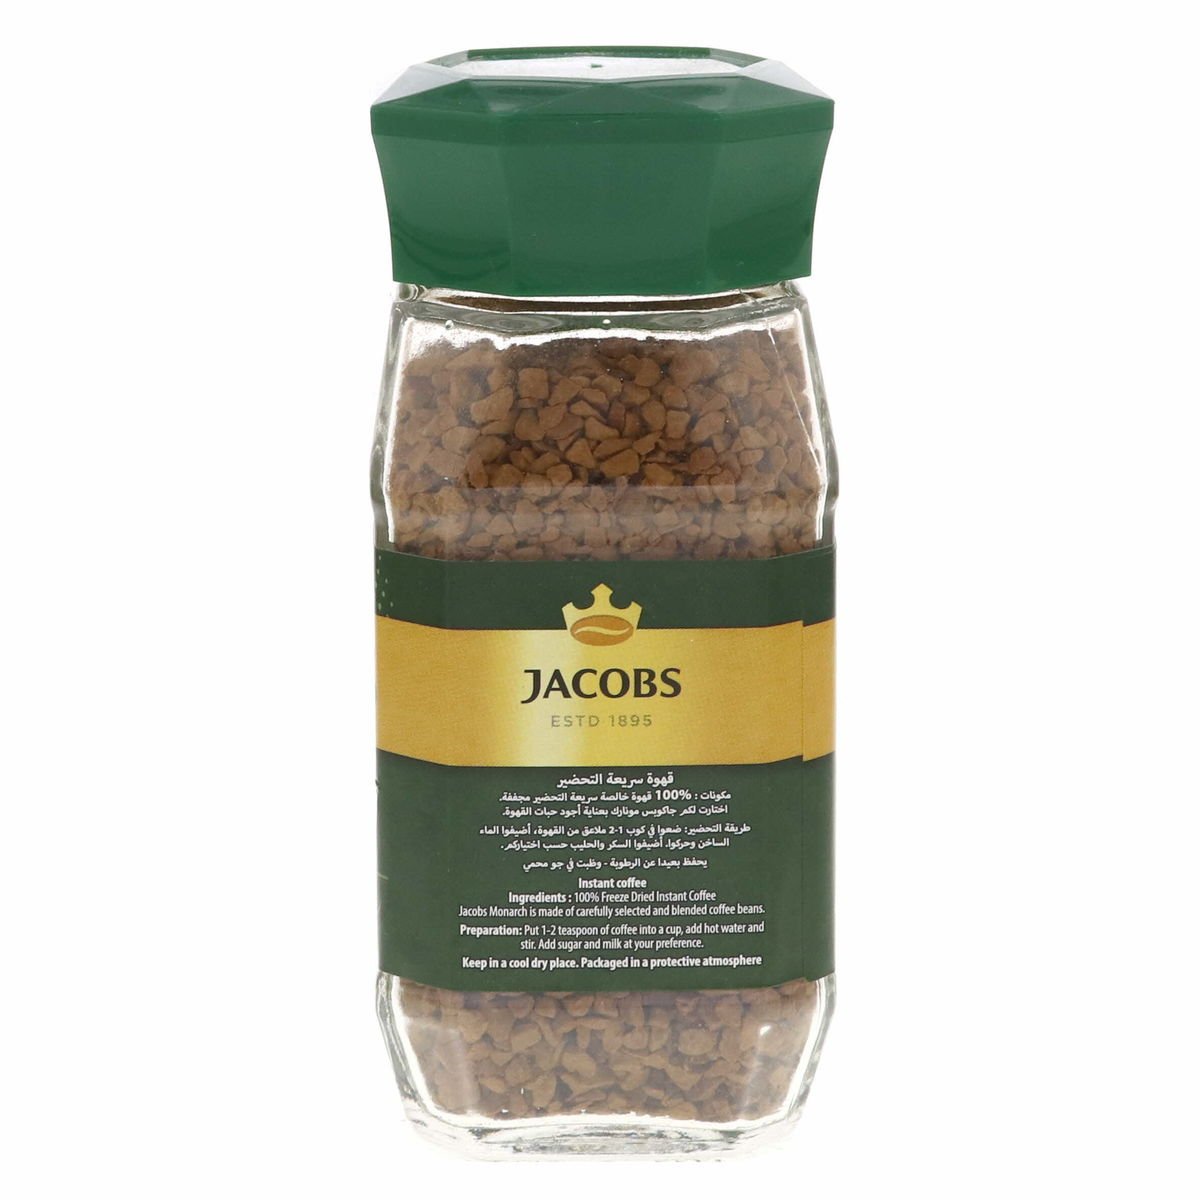 Jacobs Monarch Instant Coffee 47.5 g